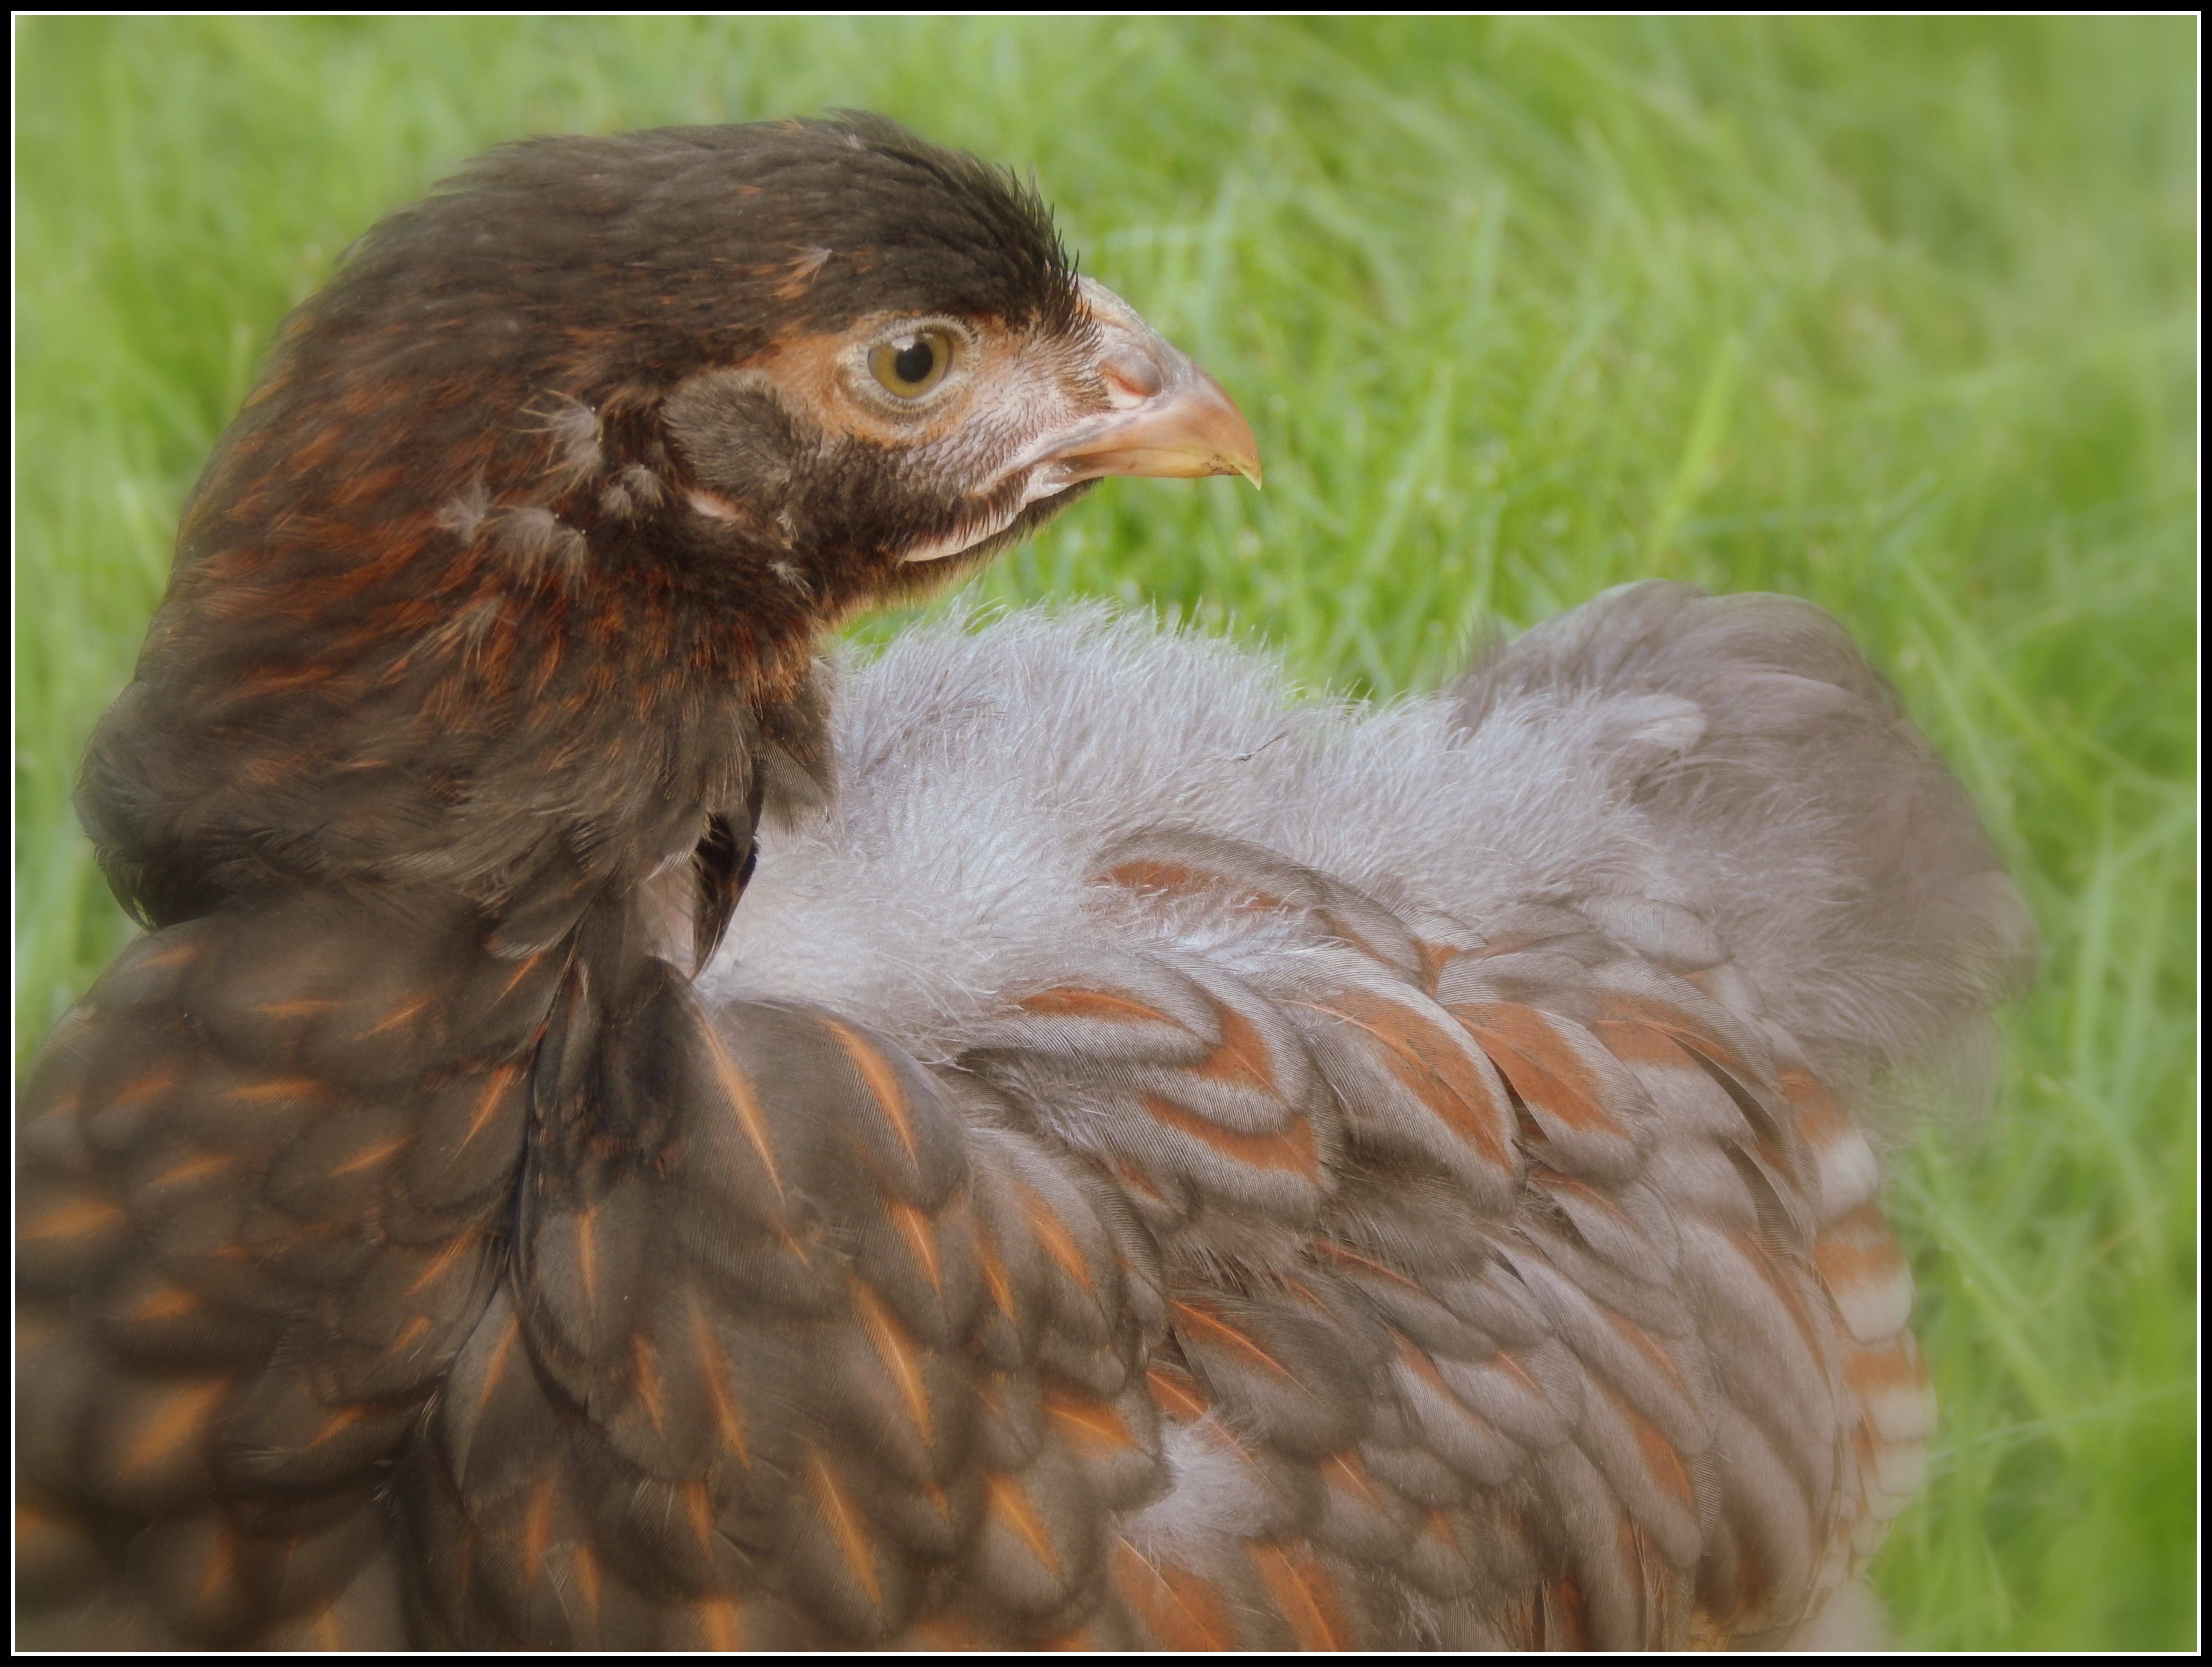 Clover my 7 week old Blue Laced Red Wyandotte...still holding on to her downy feathers like a baby with her blankie.